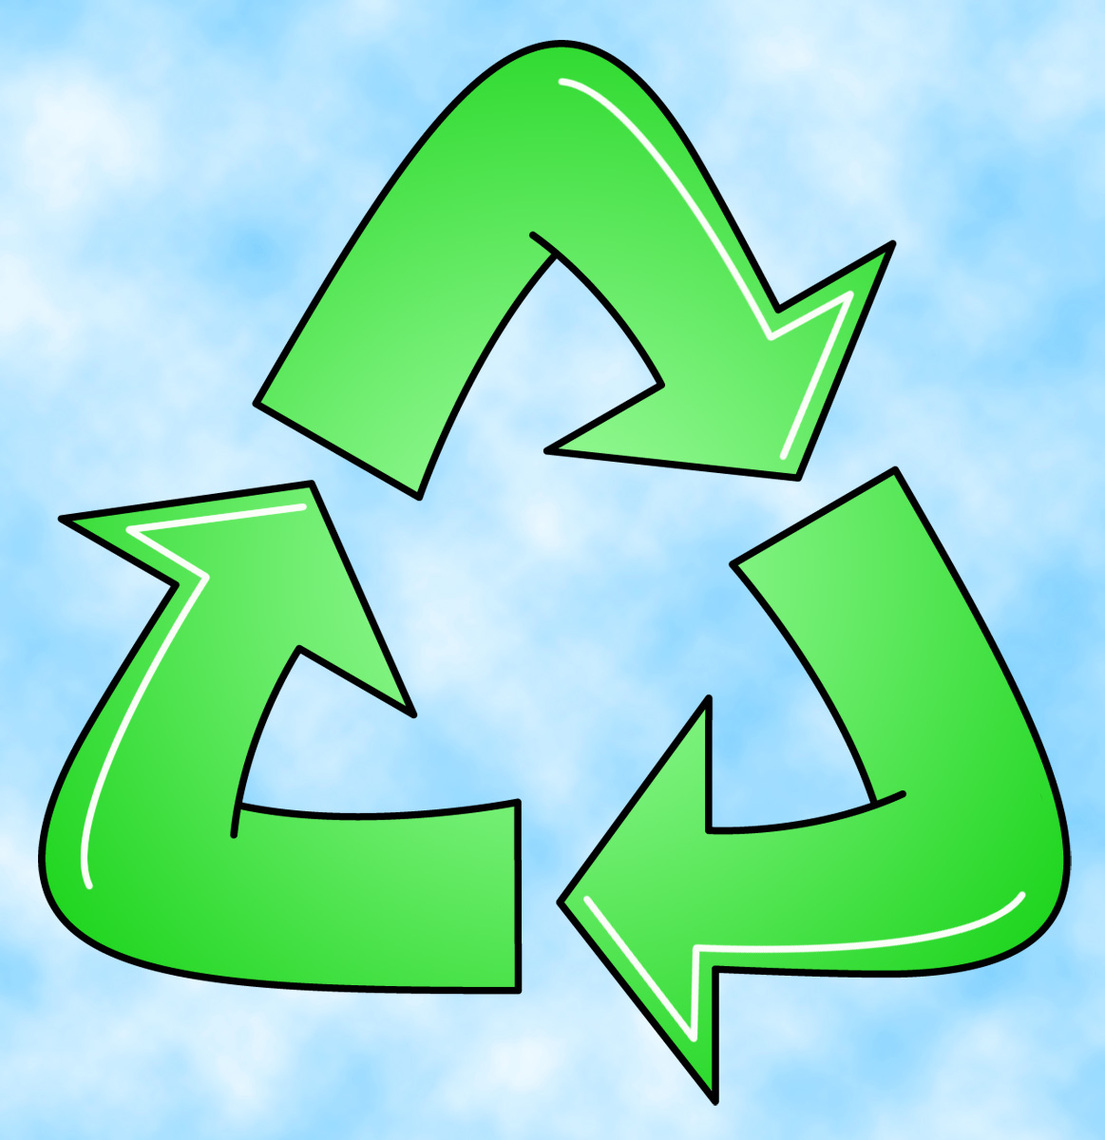 Recycle Clipart Recycle Graphics Recycle Bin Recycling Guide How To Unamed